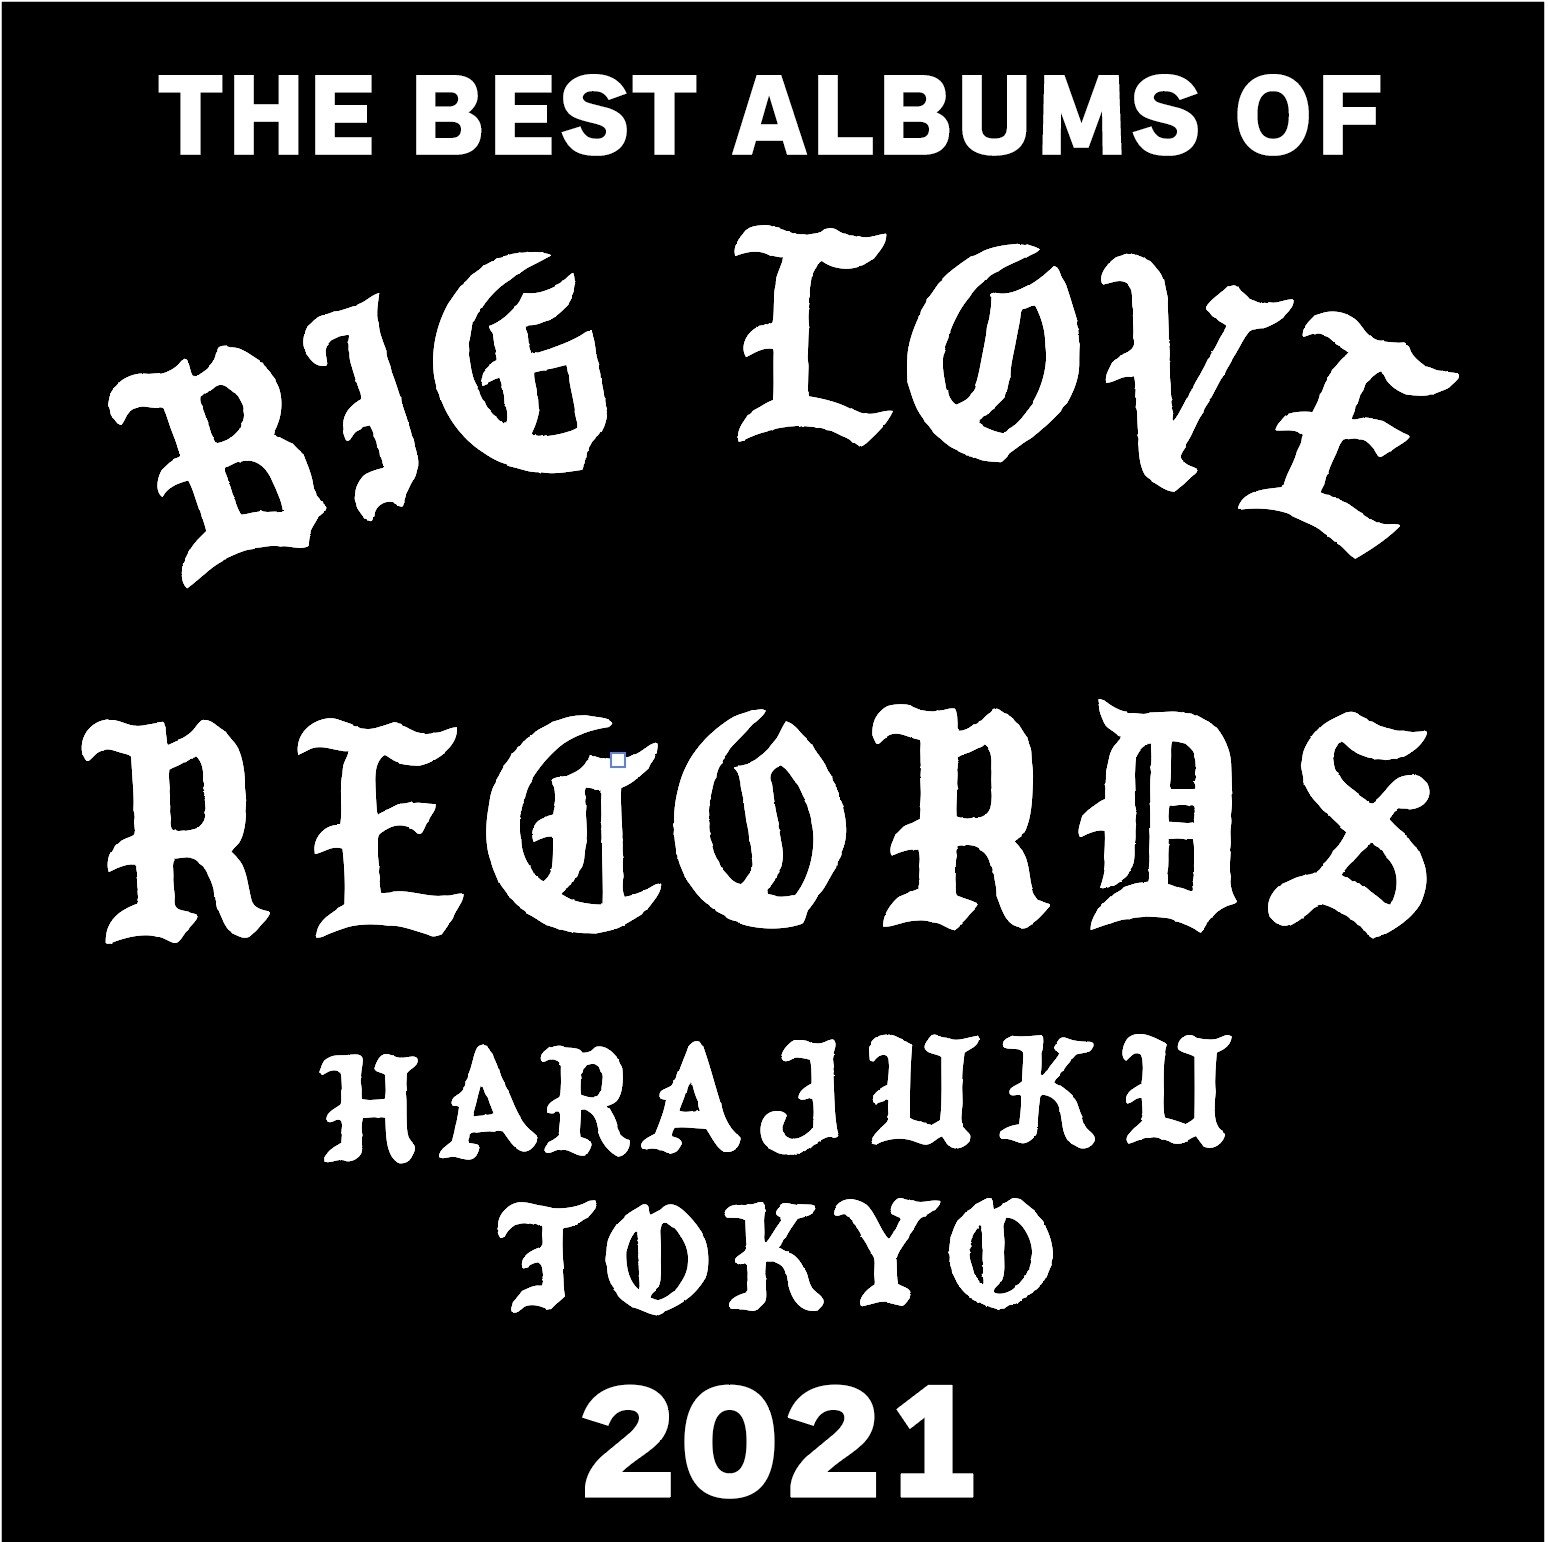 THE BEST ALBUMS OF 2021 : BIG LOVE RECORDS｜仲真史 NAKA BIG LOVE